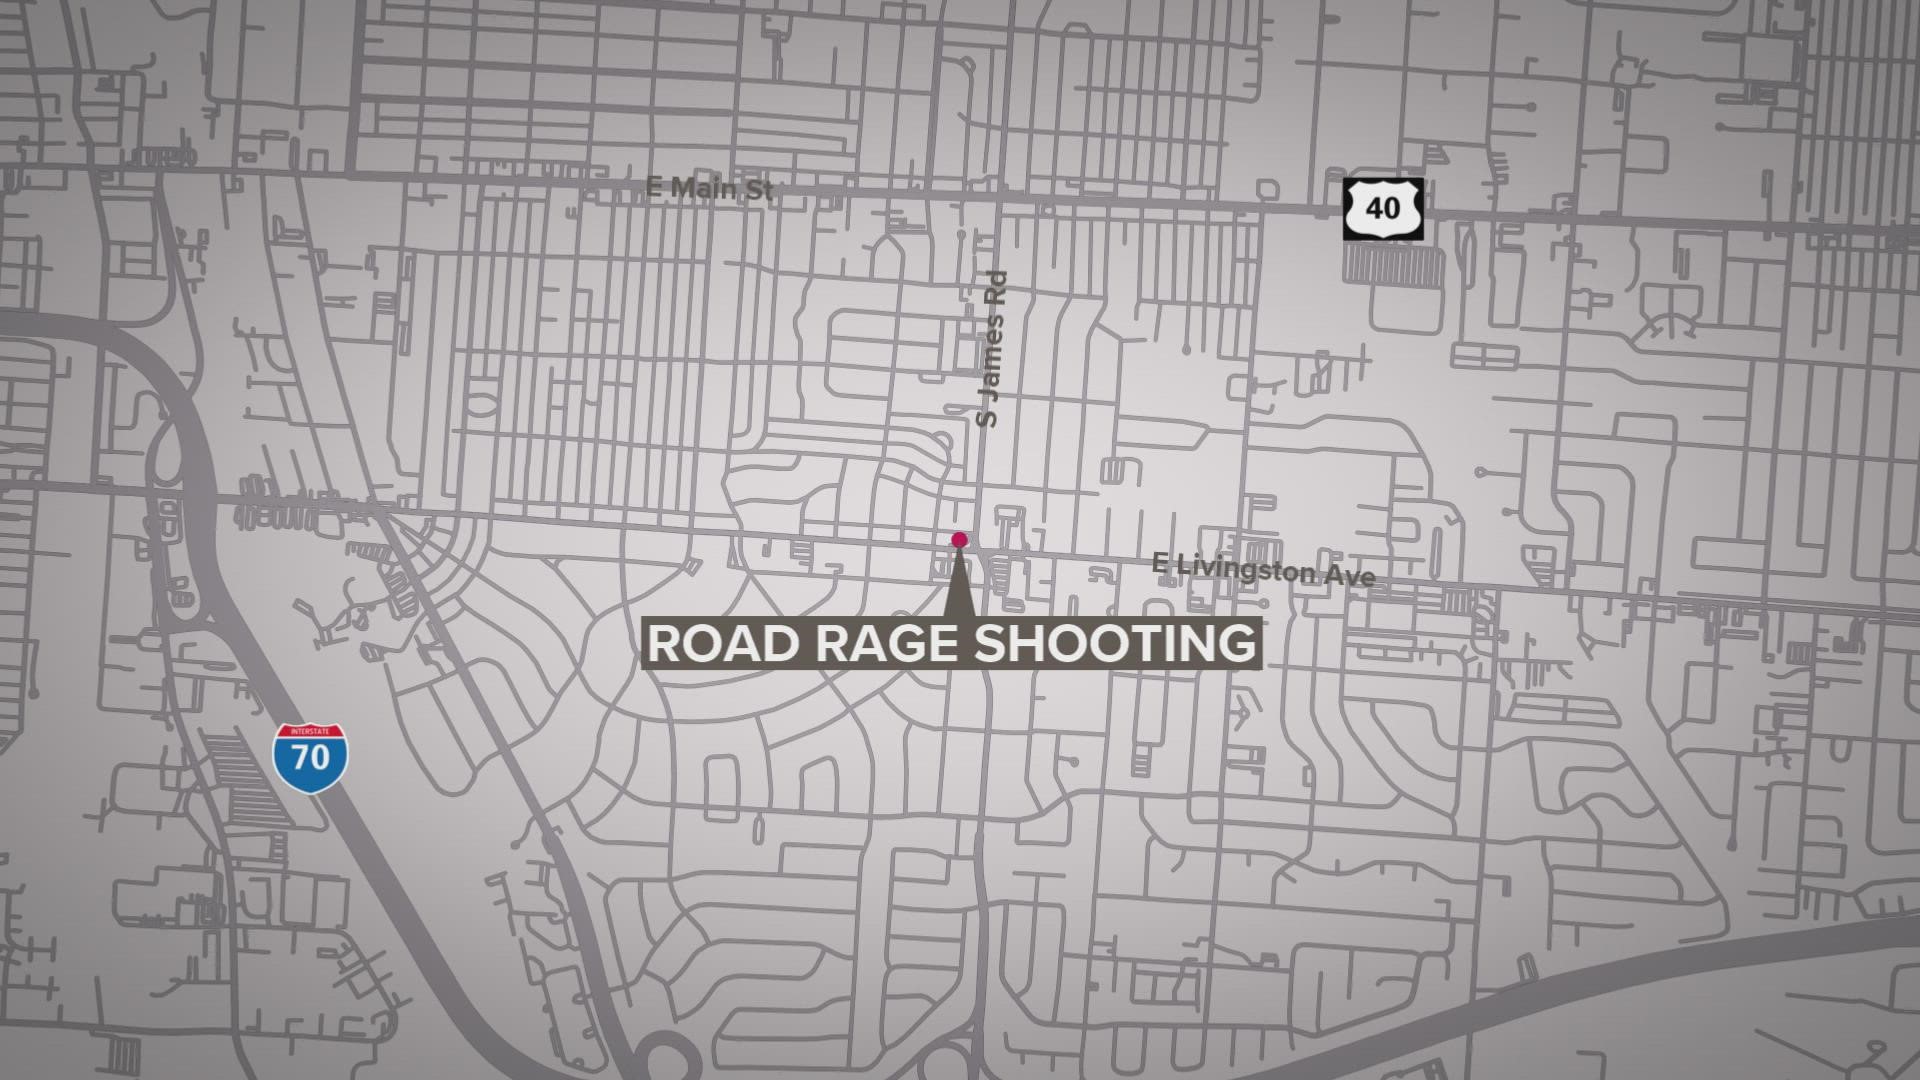 A 66-year-old woman was injured in a shooting on Friday as the result of what police say was a road rage incident in east Columbus.